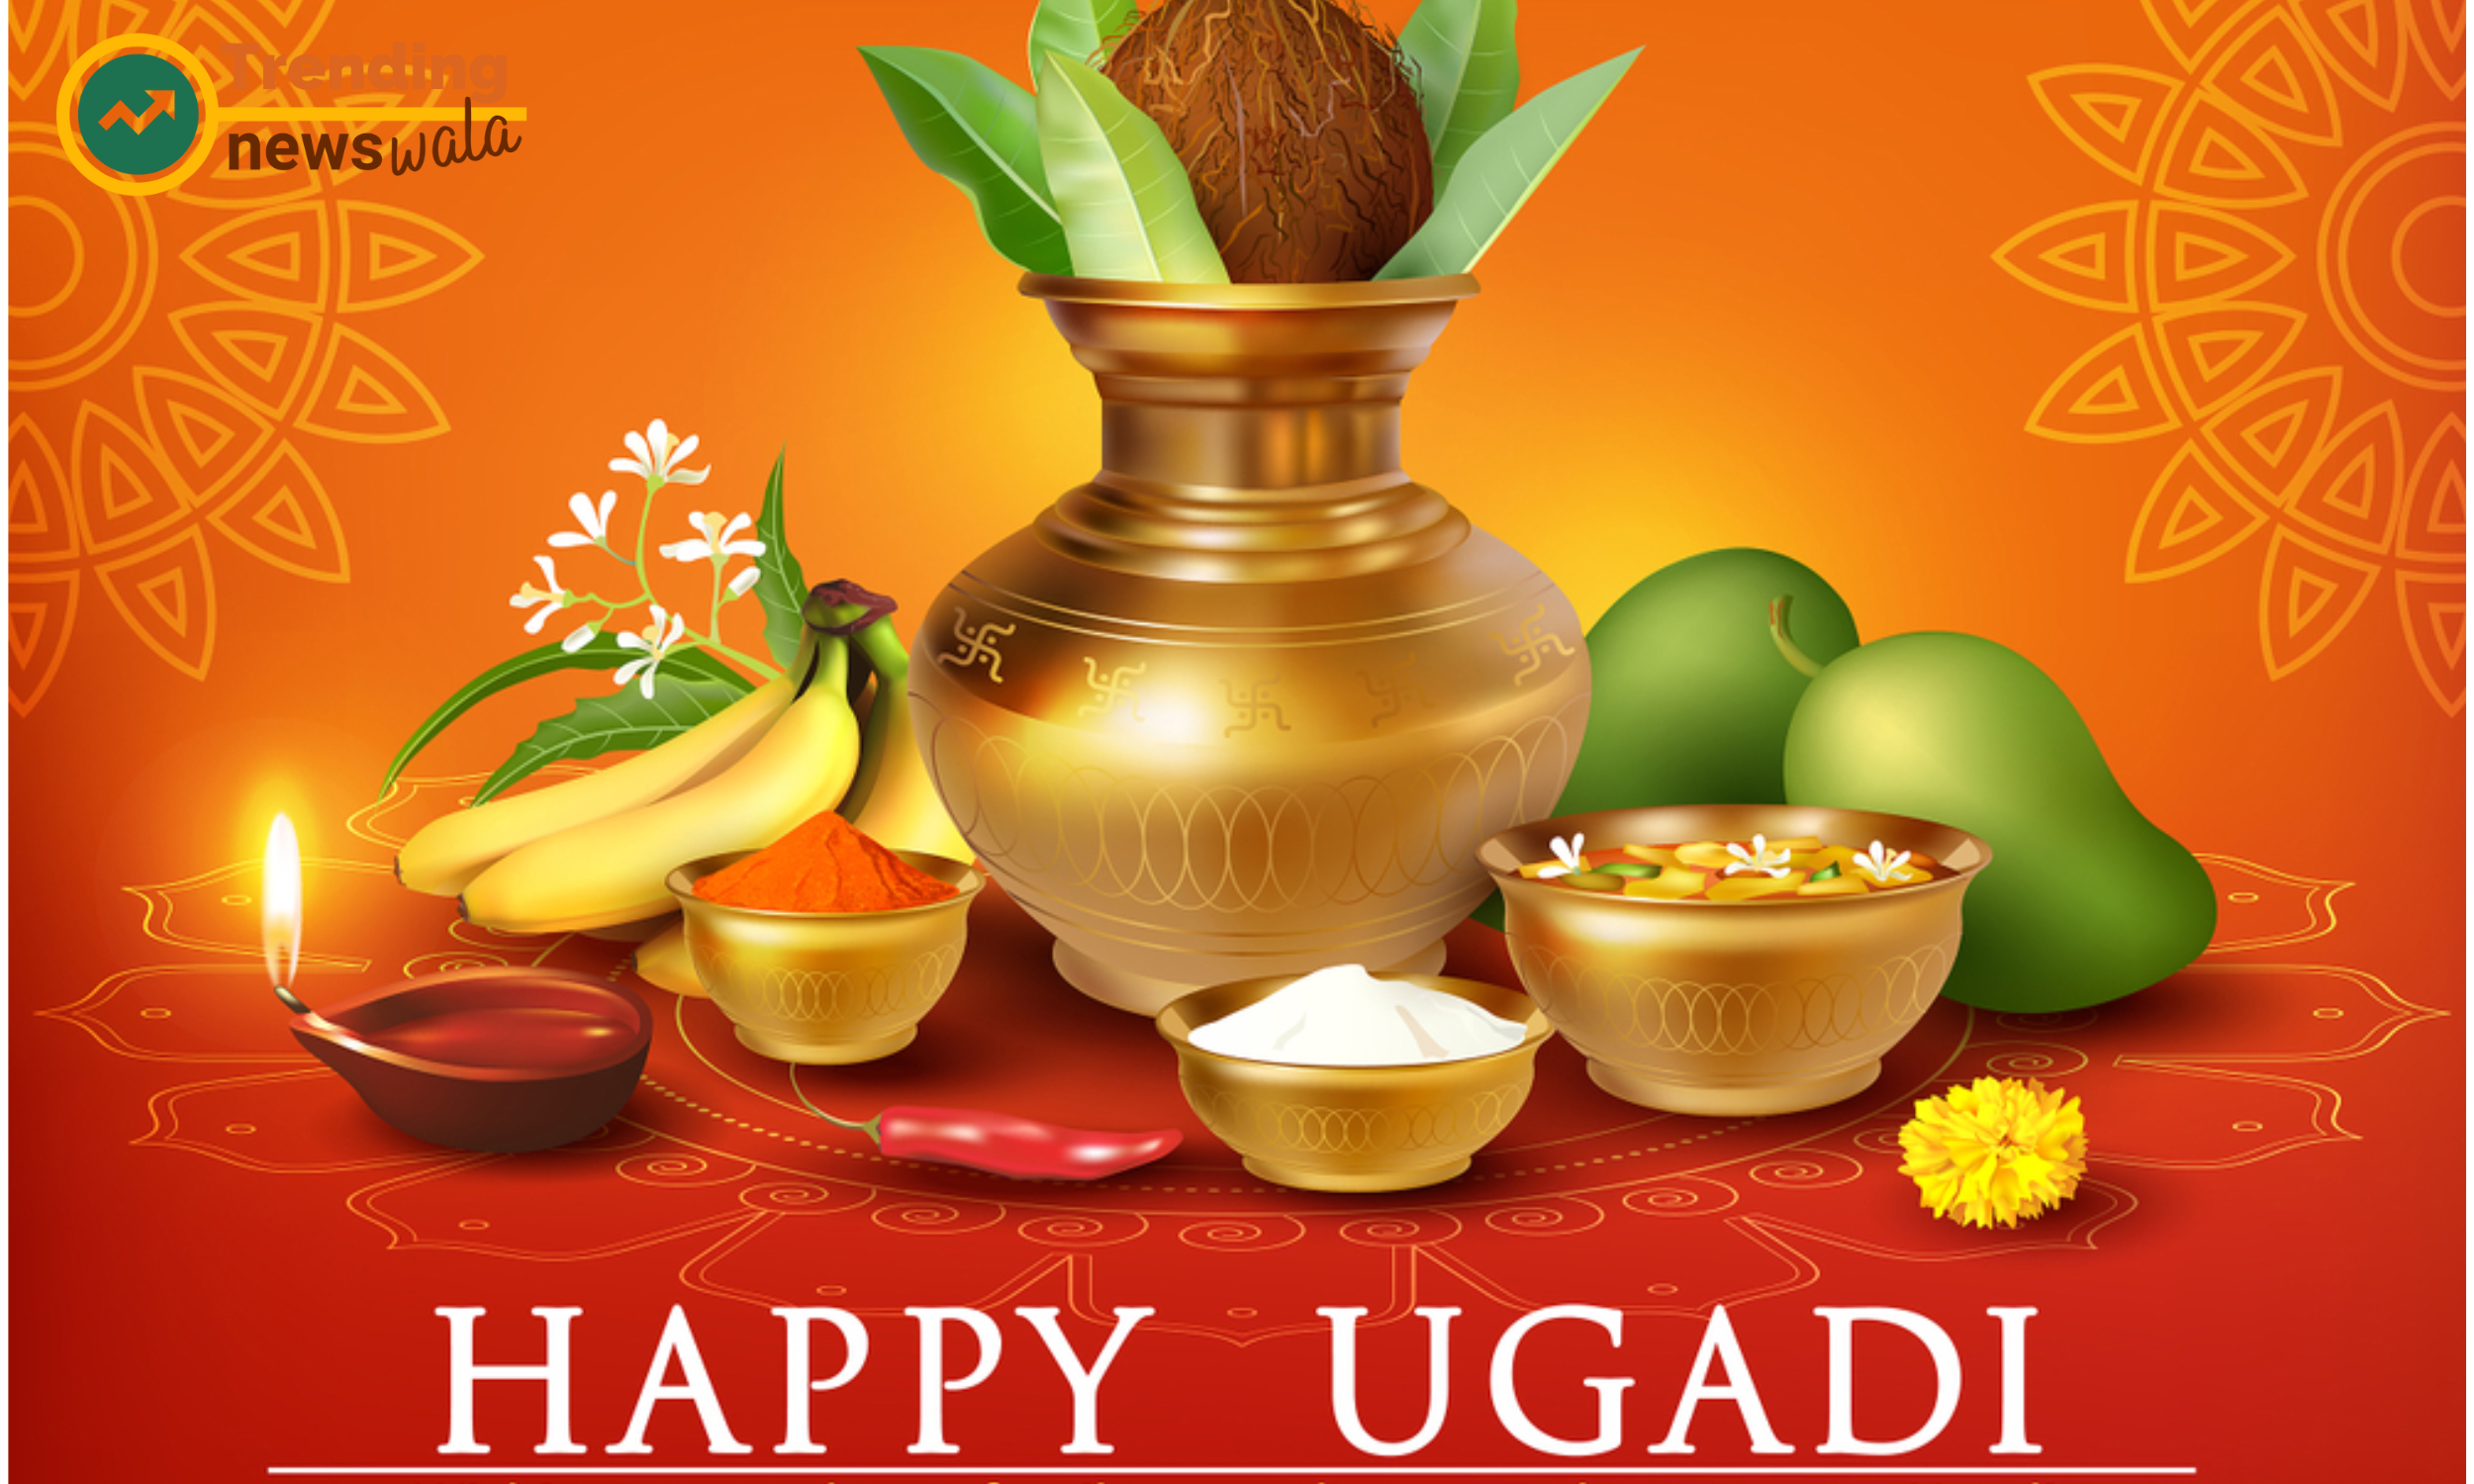 The Ugadi Pachadi, a unique concoction made with a mix of six flavors Ugadi Pachadi